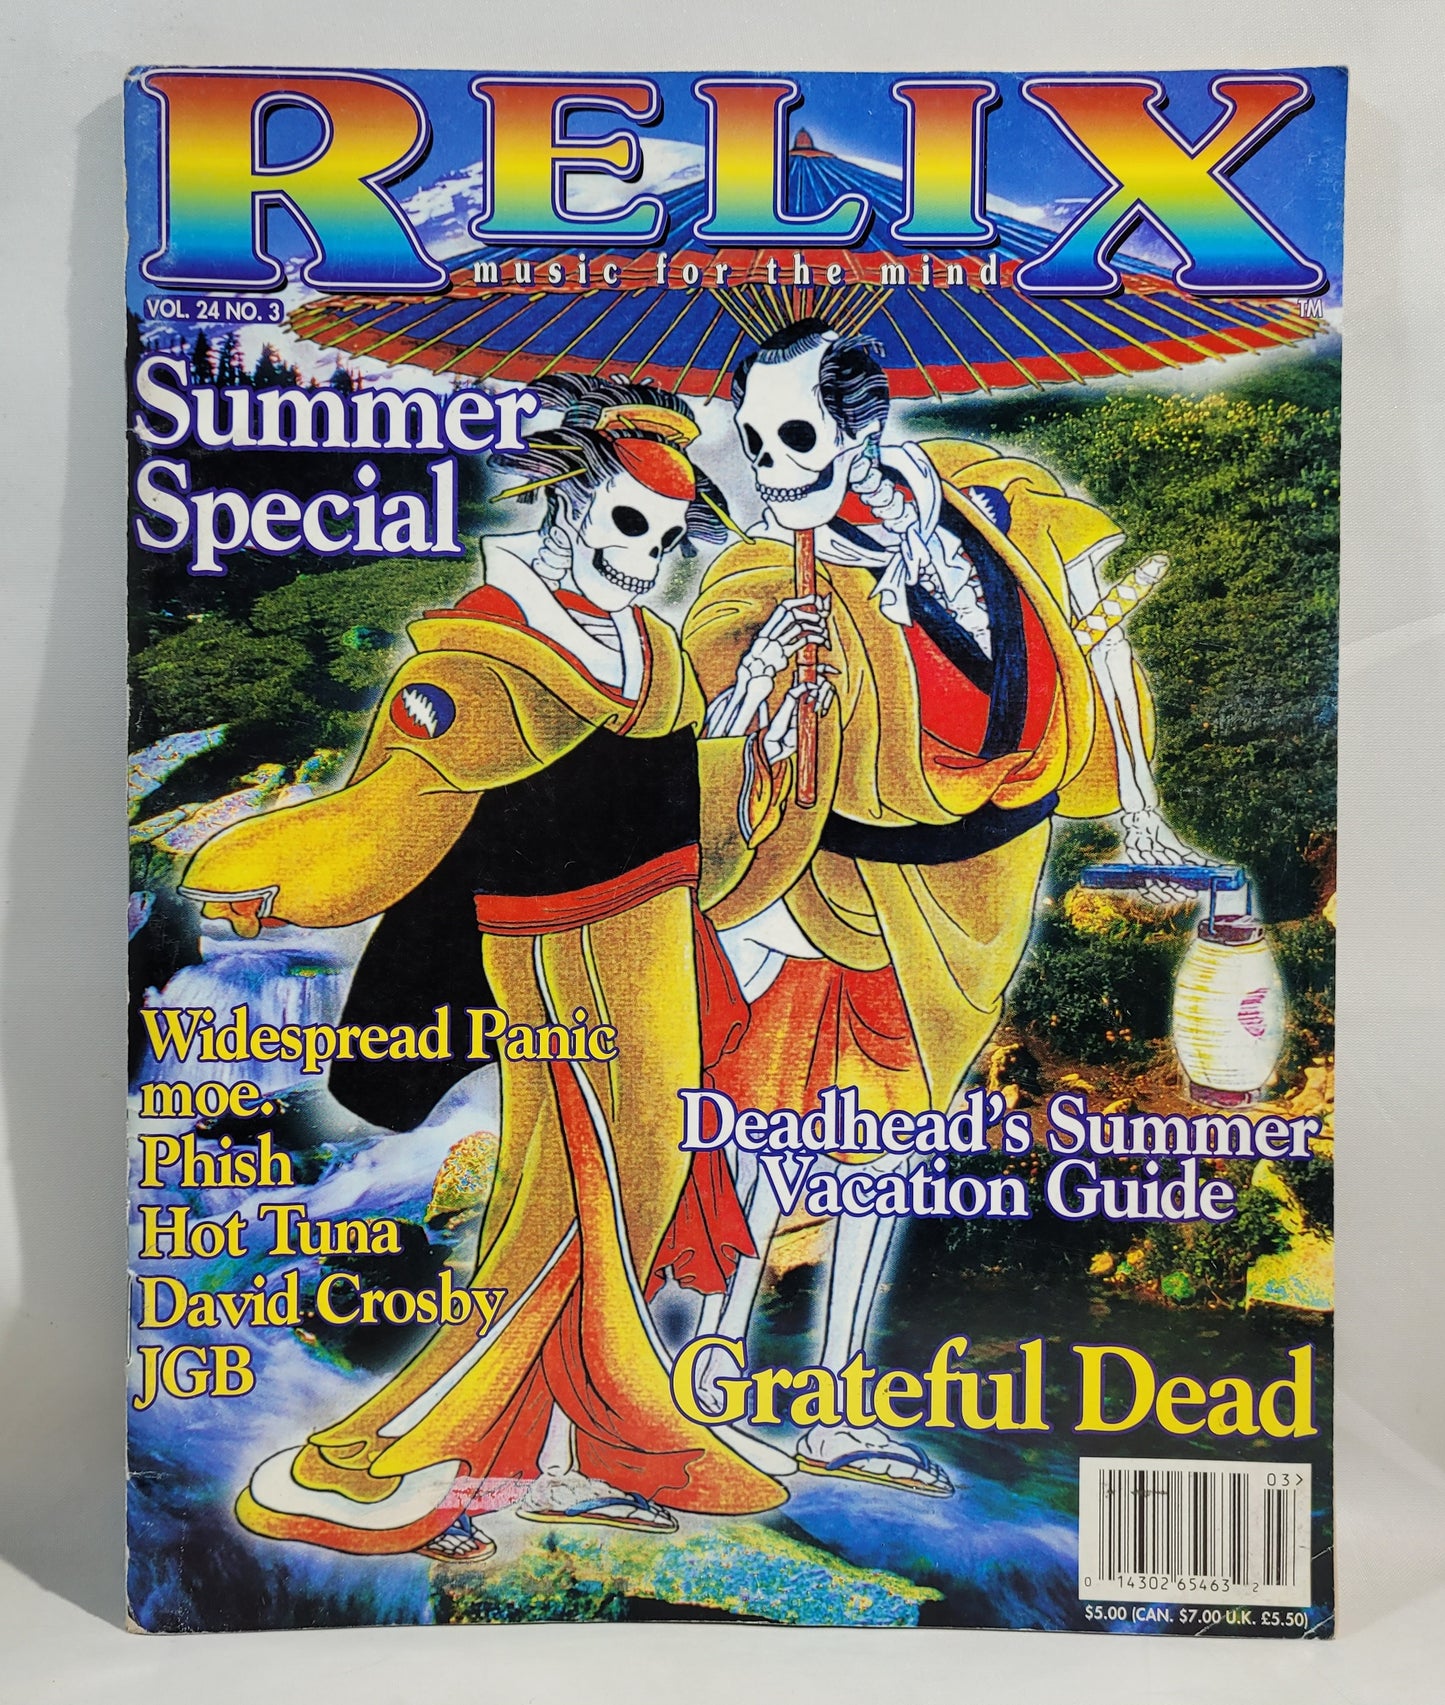 Relix - Music for the Mind Vol. 24 No. 3 Summer Special [Magazine]